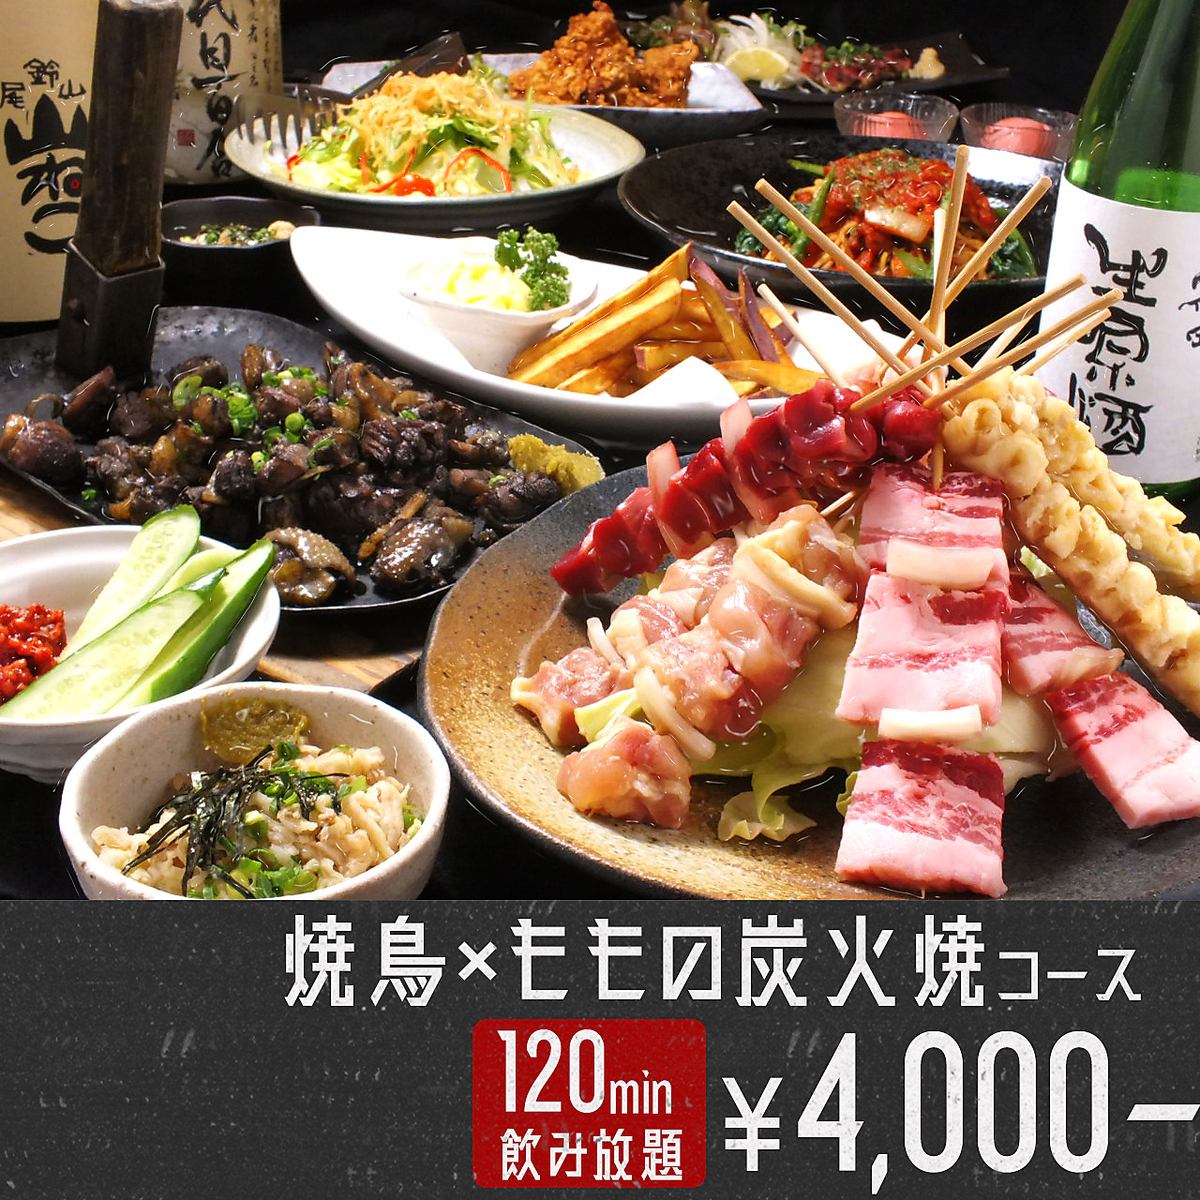 120-minute all-you-can-drink course including our signature [Bincho charcoal-grilled thighs] for 4,000 yen!